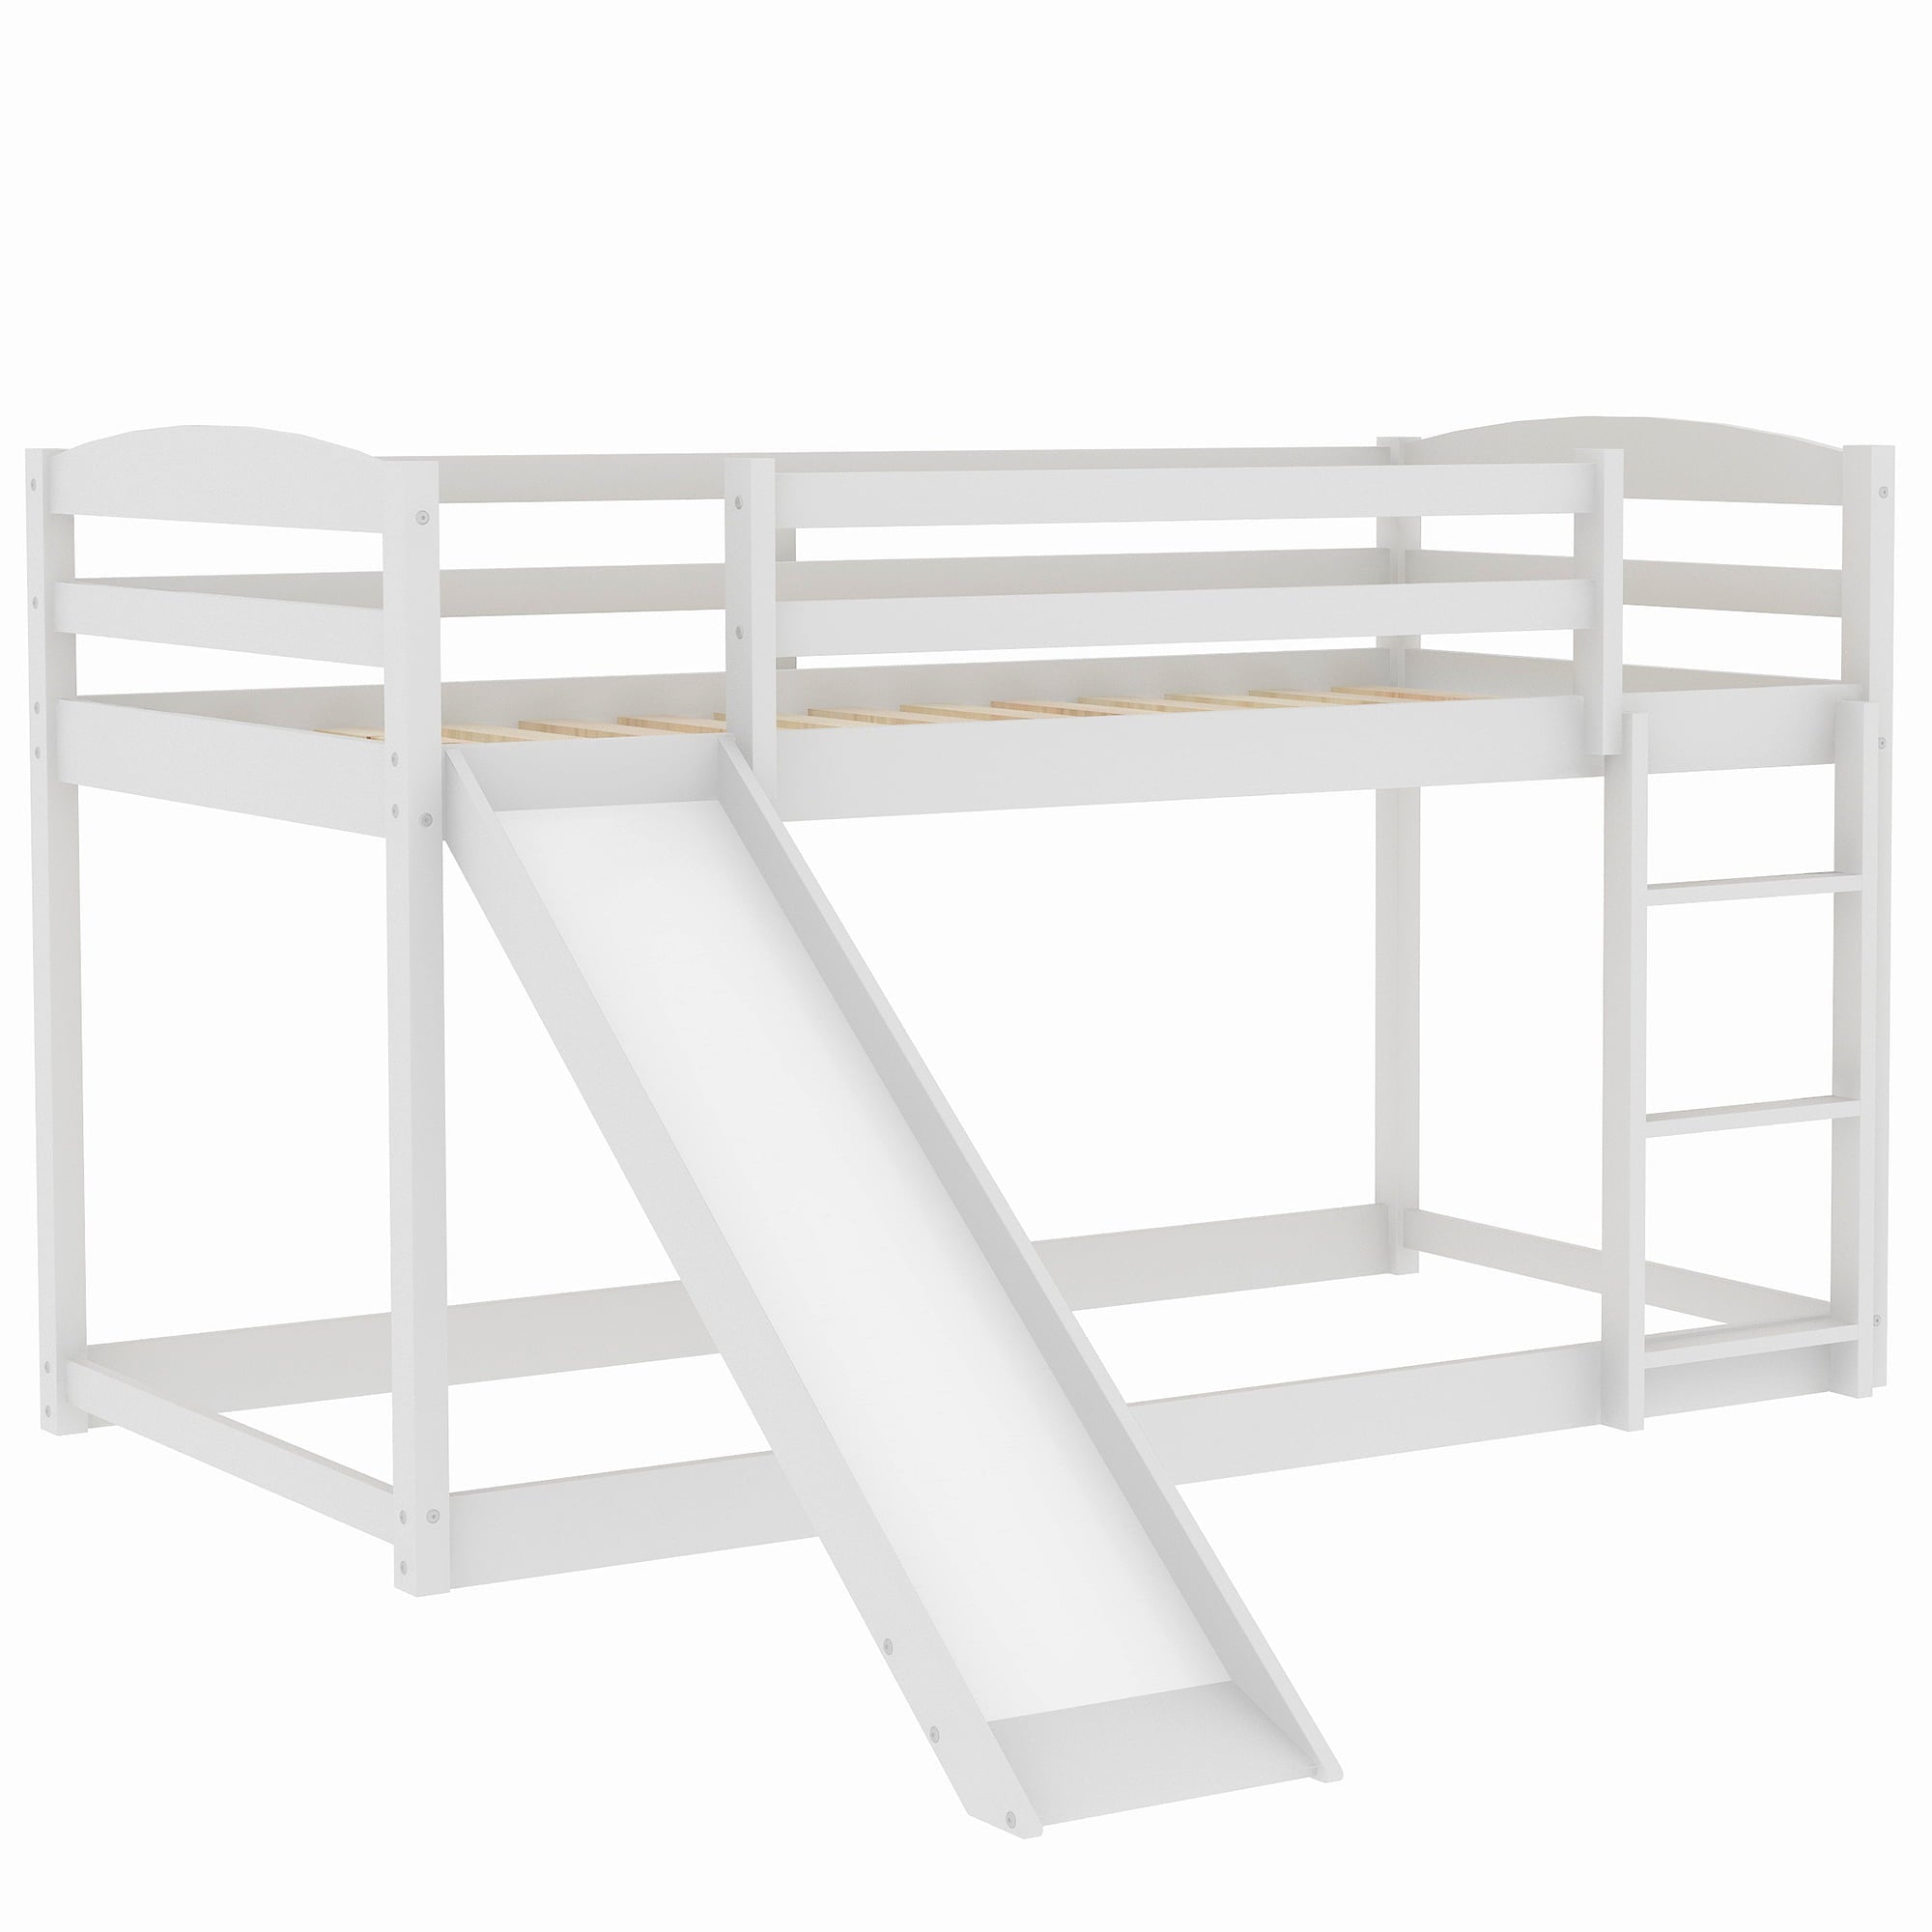 Sesslife Wood Floor Bunk Bed with Convertible Slide and Ladder for Boys Girls Toddlers, White Twin Over Twin Bunk Bed for Home Children’s Room, TE850